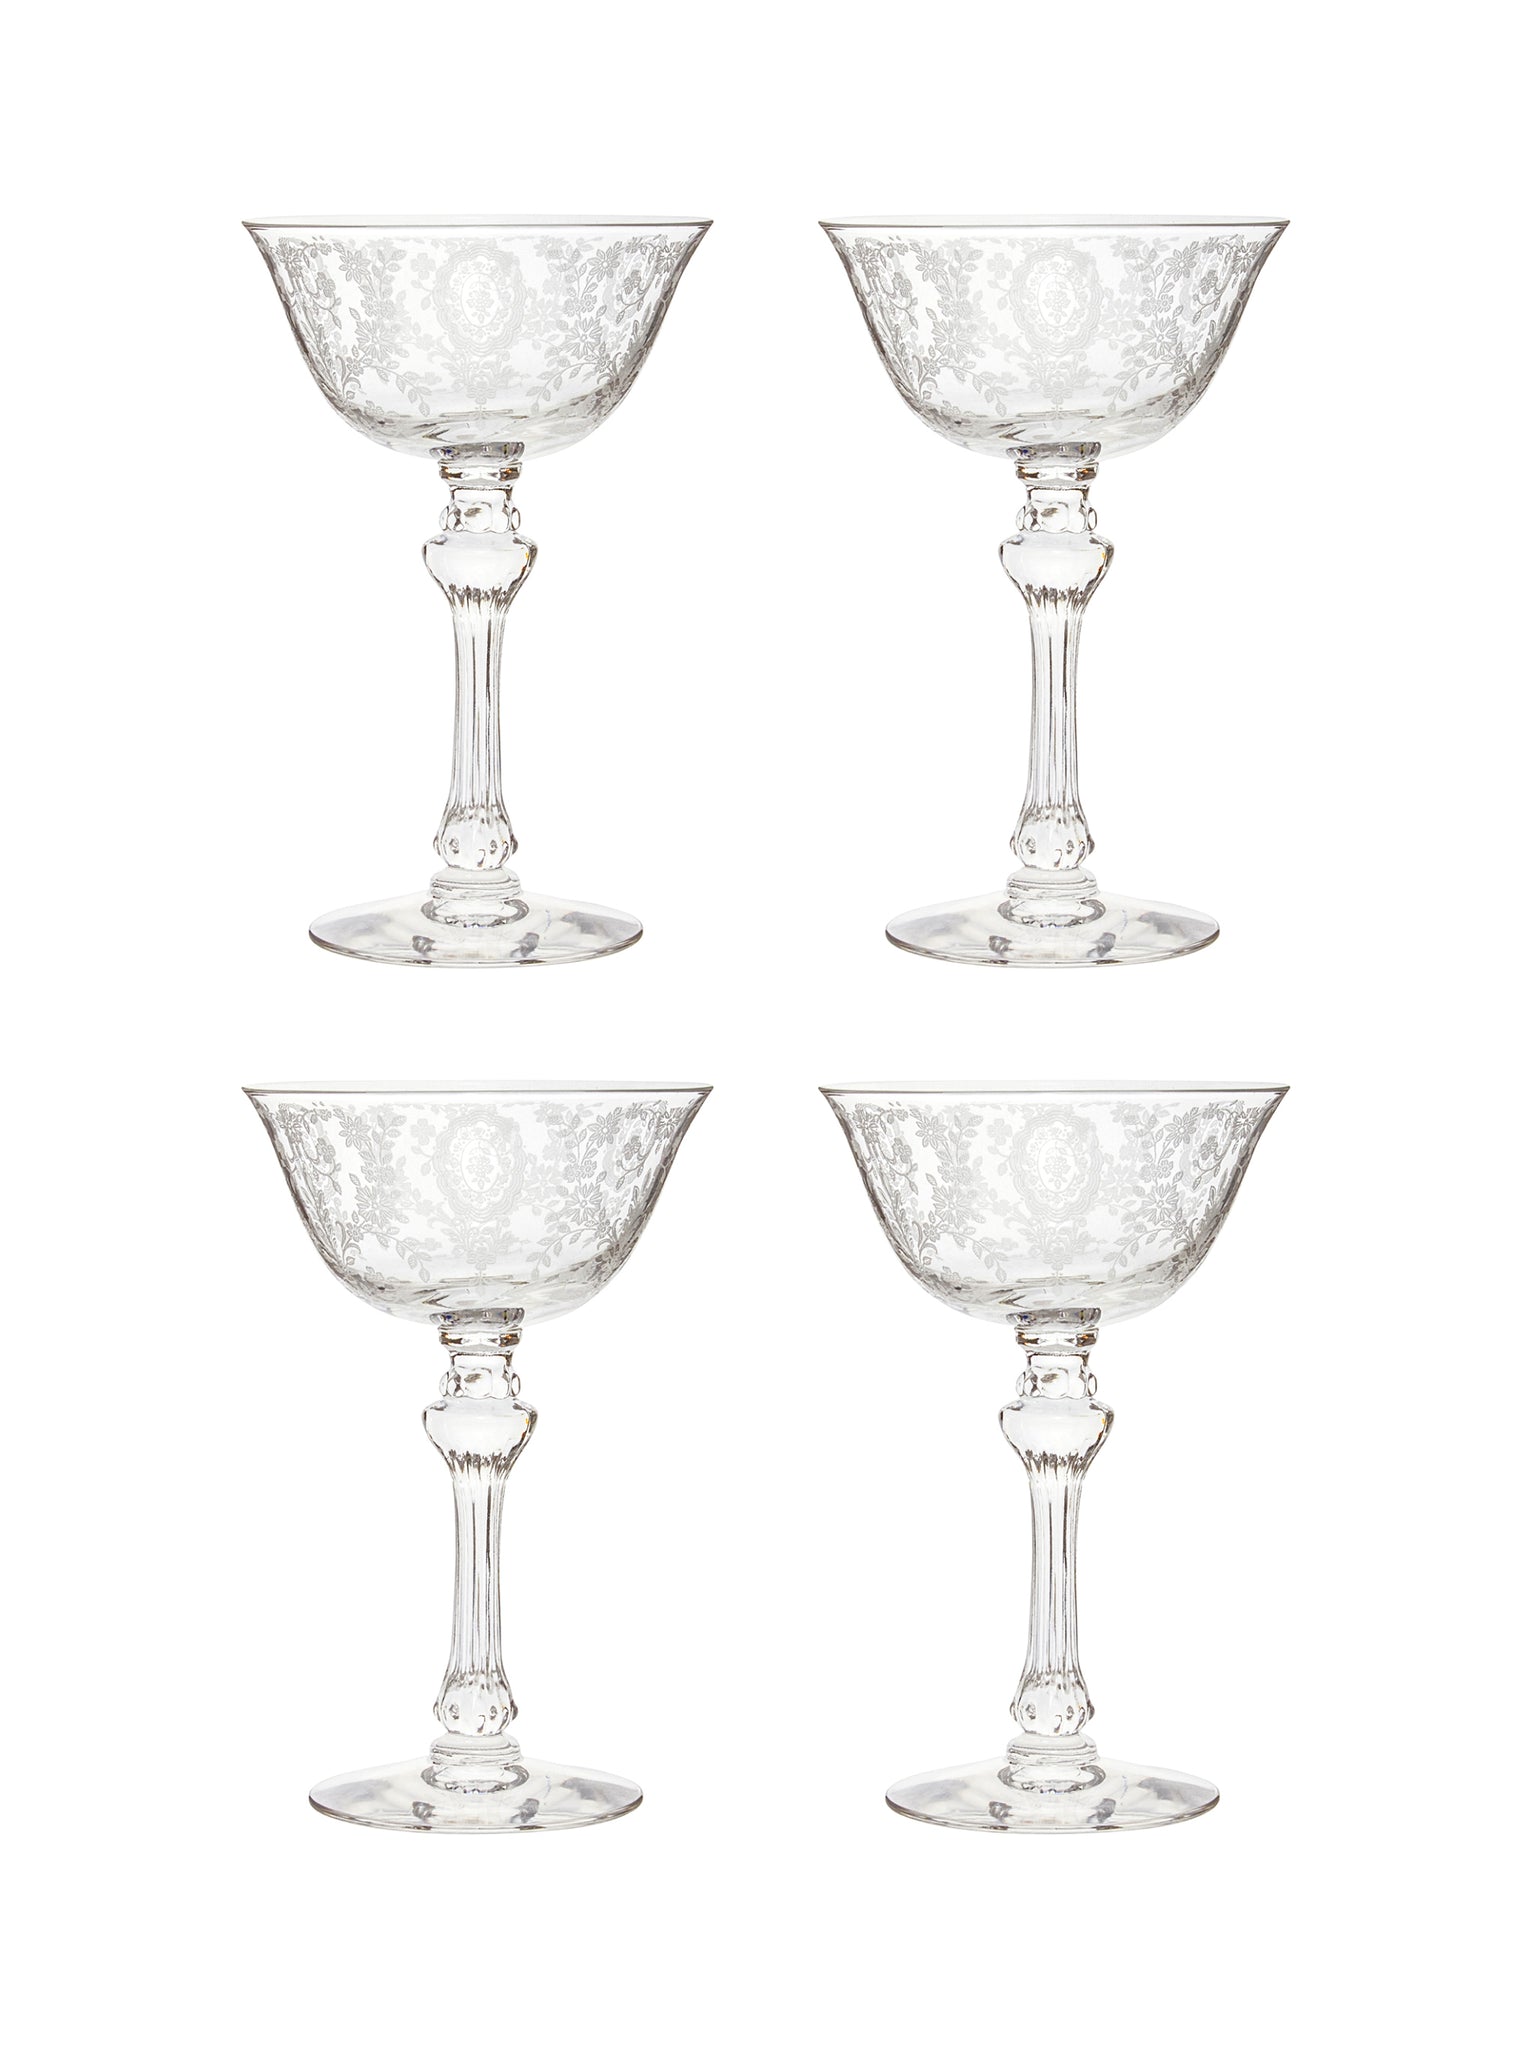 Vintage 1940s June Night Champagne Coupes